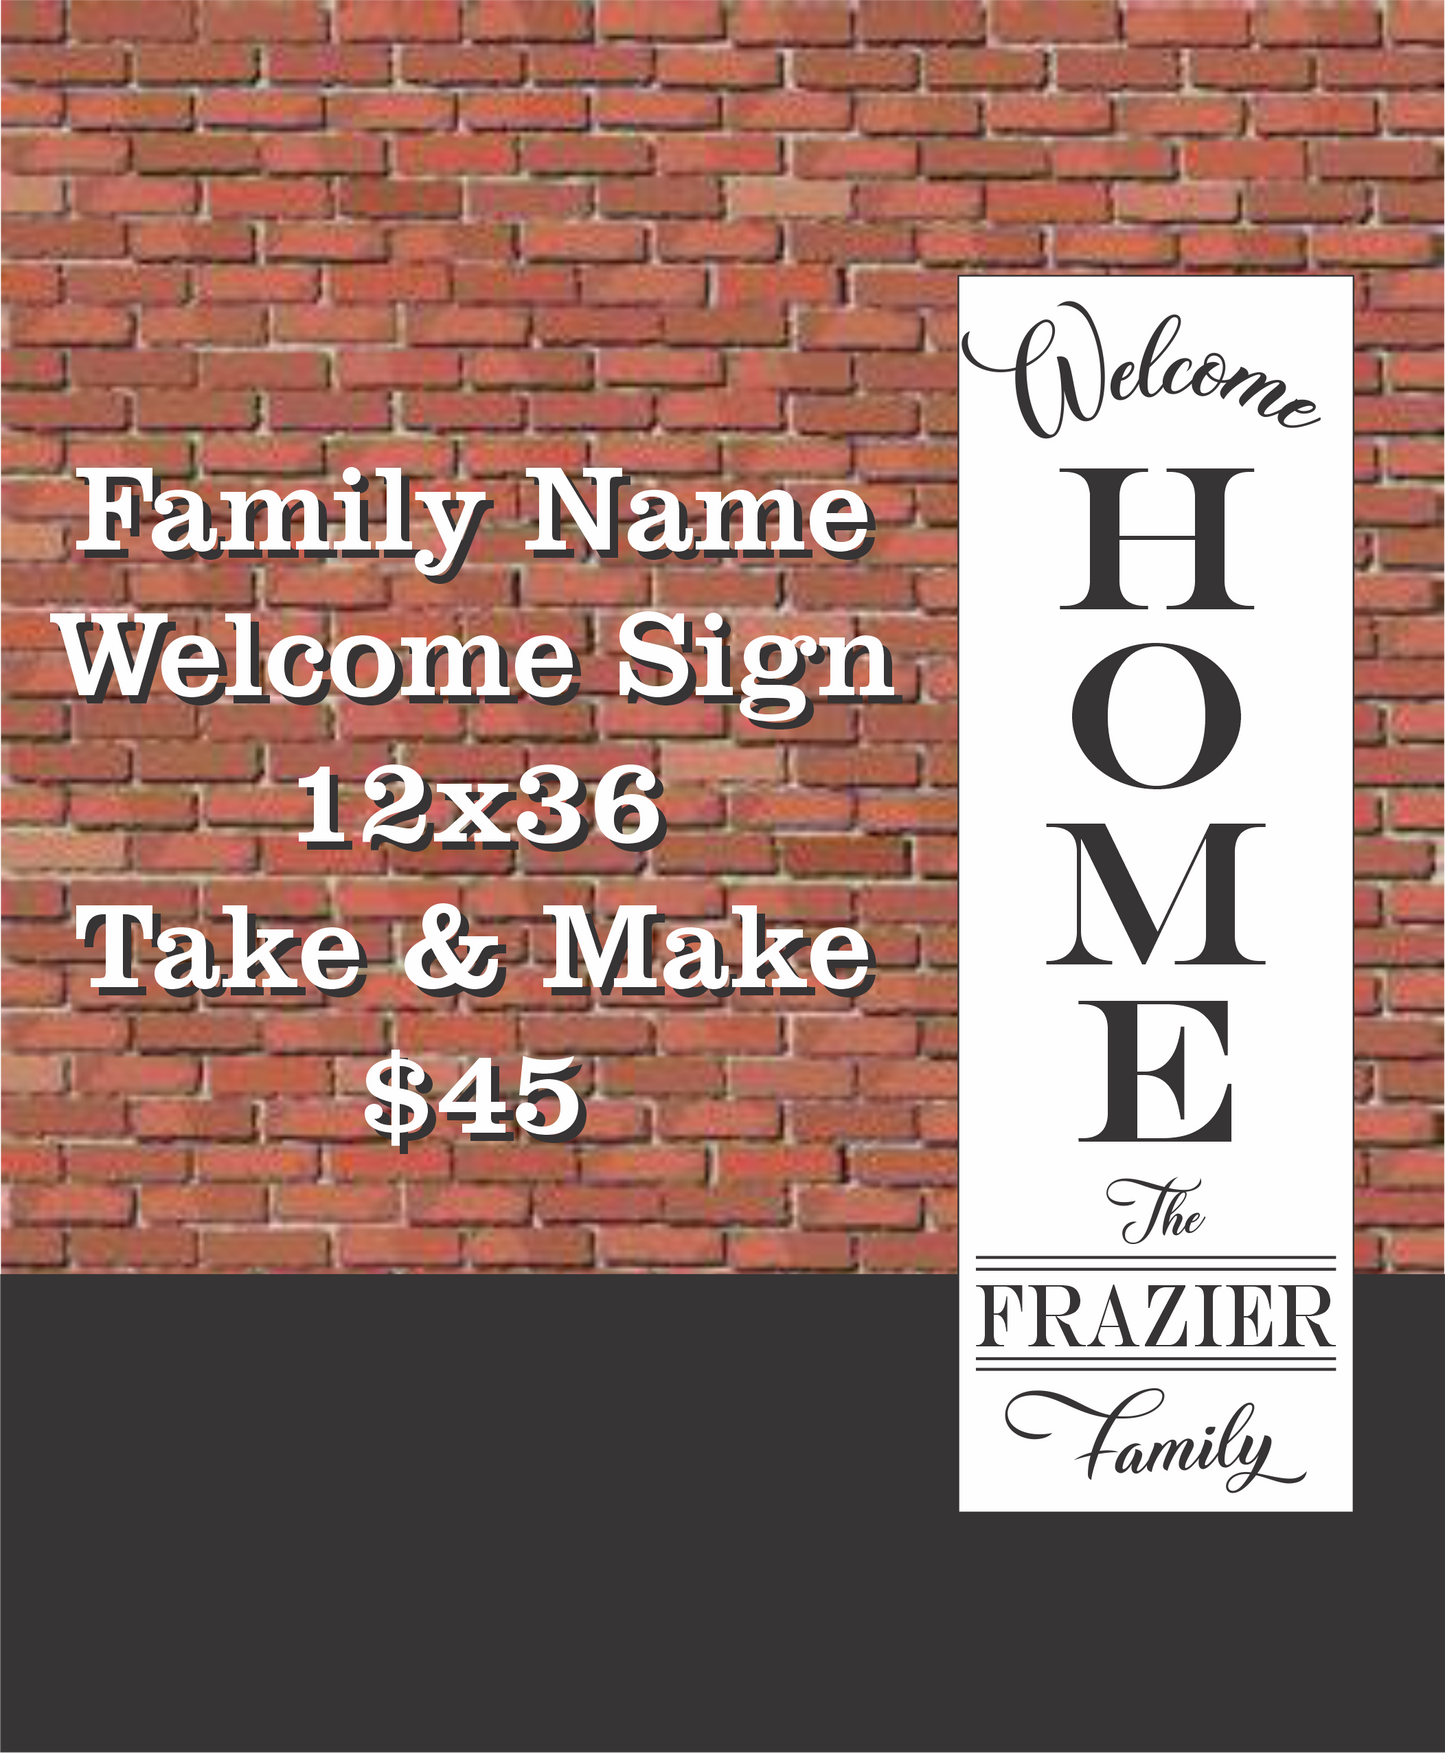 Family Name Welcome Sign Kit